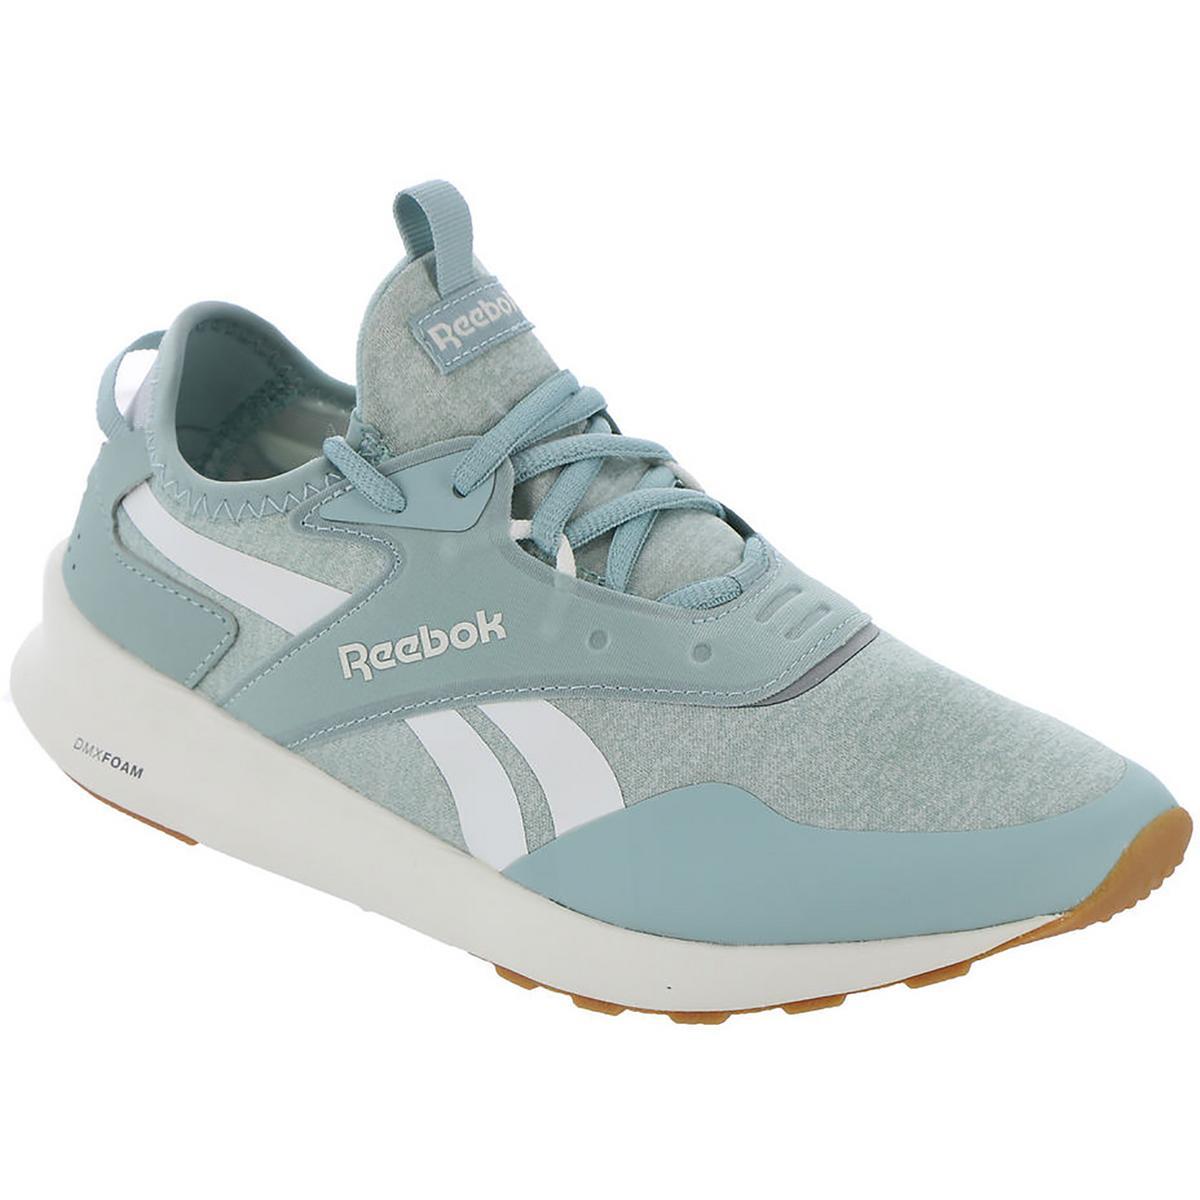 Reebok Womens Spark Run Trainers Athletic and Training Shoes Sneakers Bhfo 8072 Seagrey/Chalk/Metallic Silver